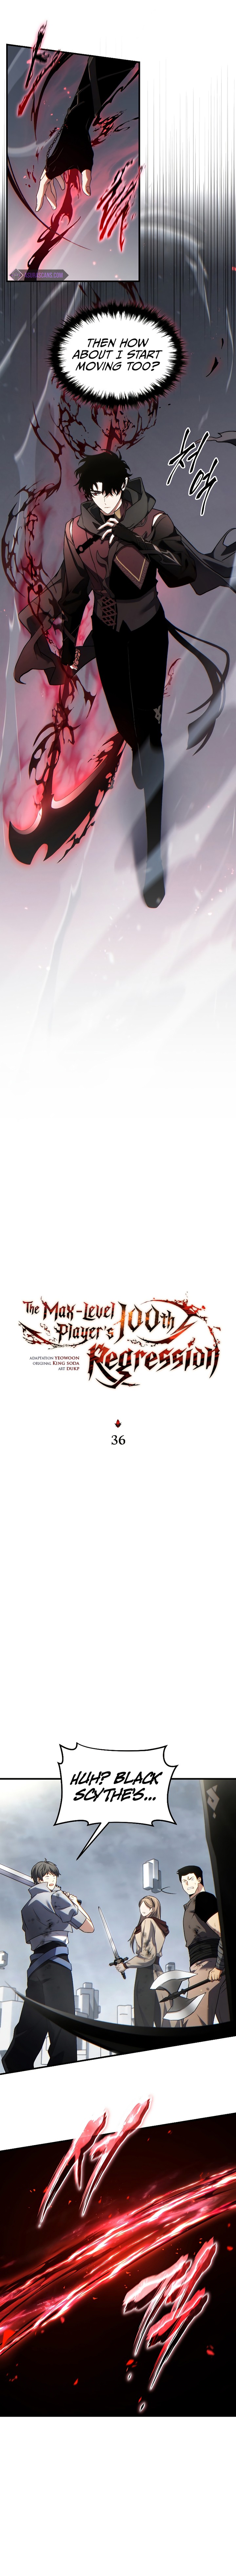 The Max Level Players 100th Regression 36 8